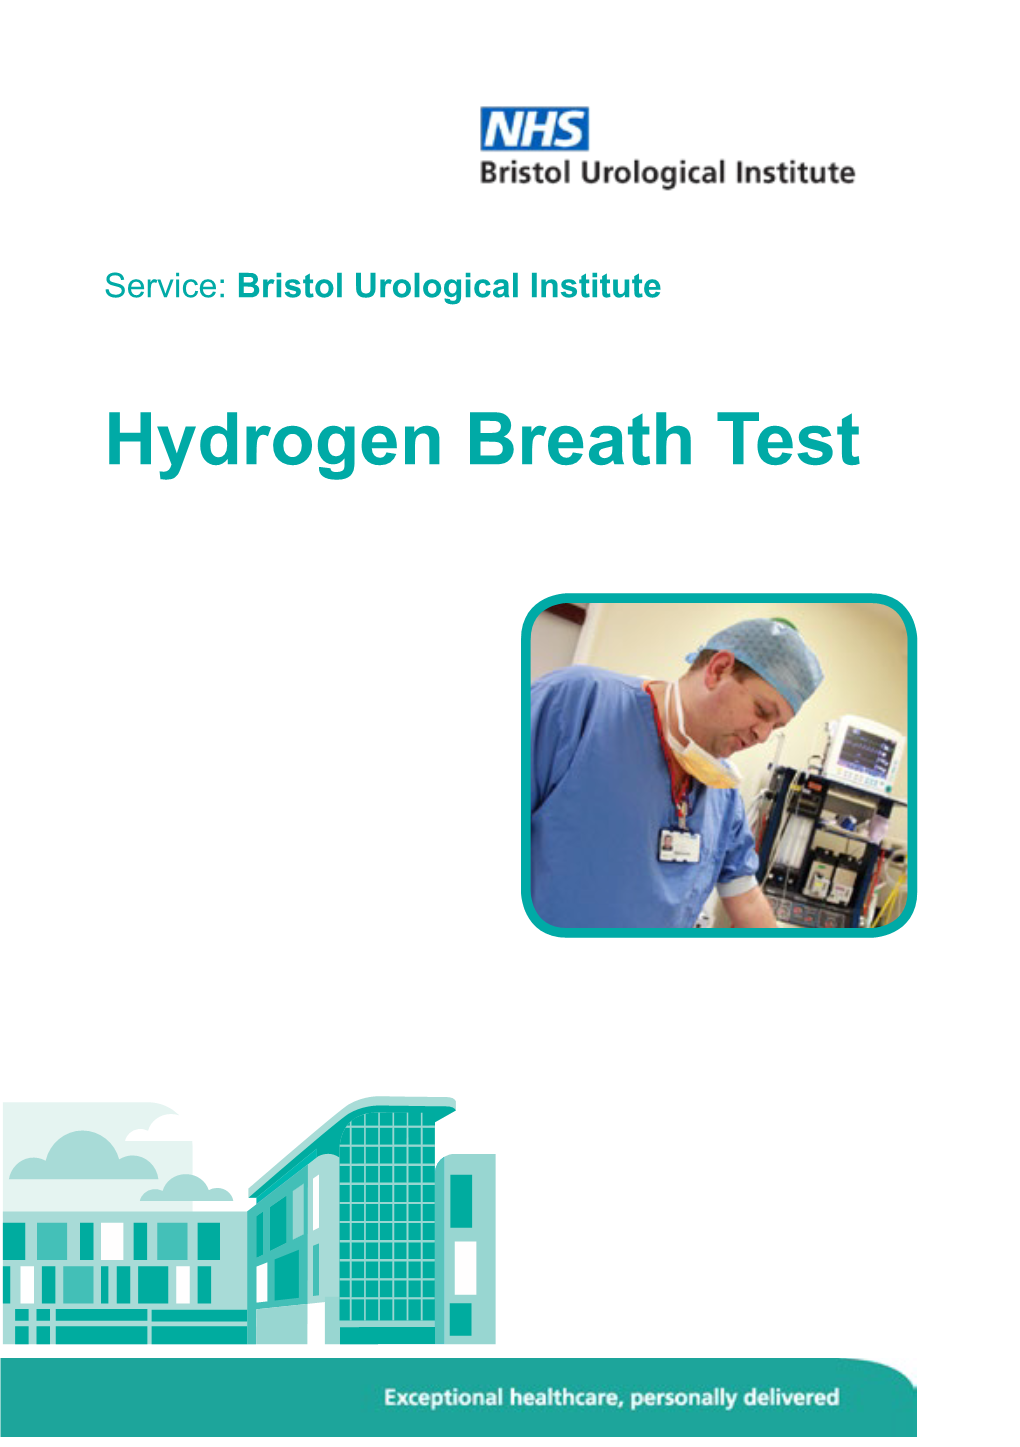 Hydrogen Breath Test Hydrogen Breath Tests You Have Been Asked to Attend This Test to Diagnose Either